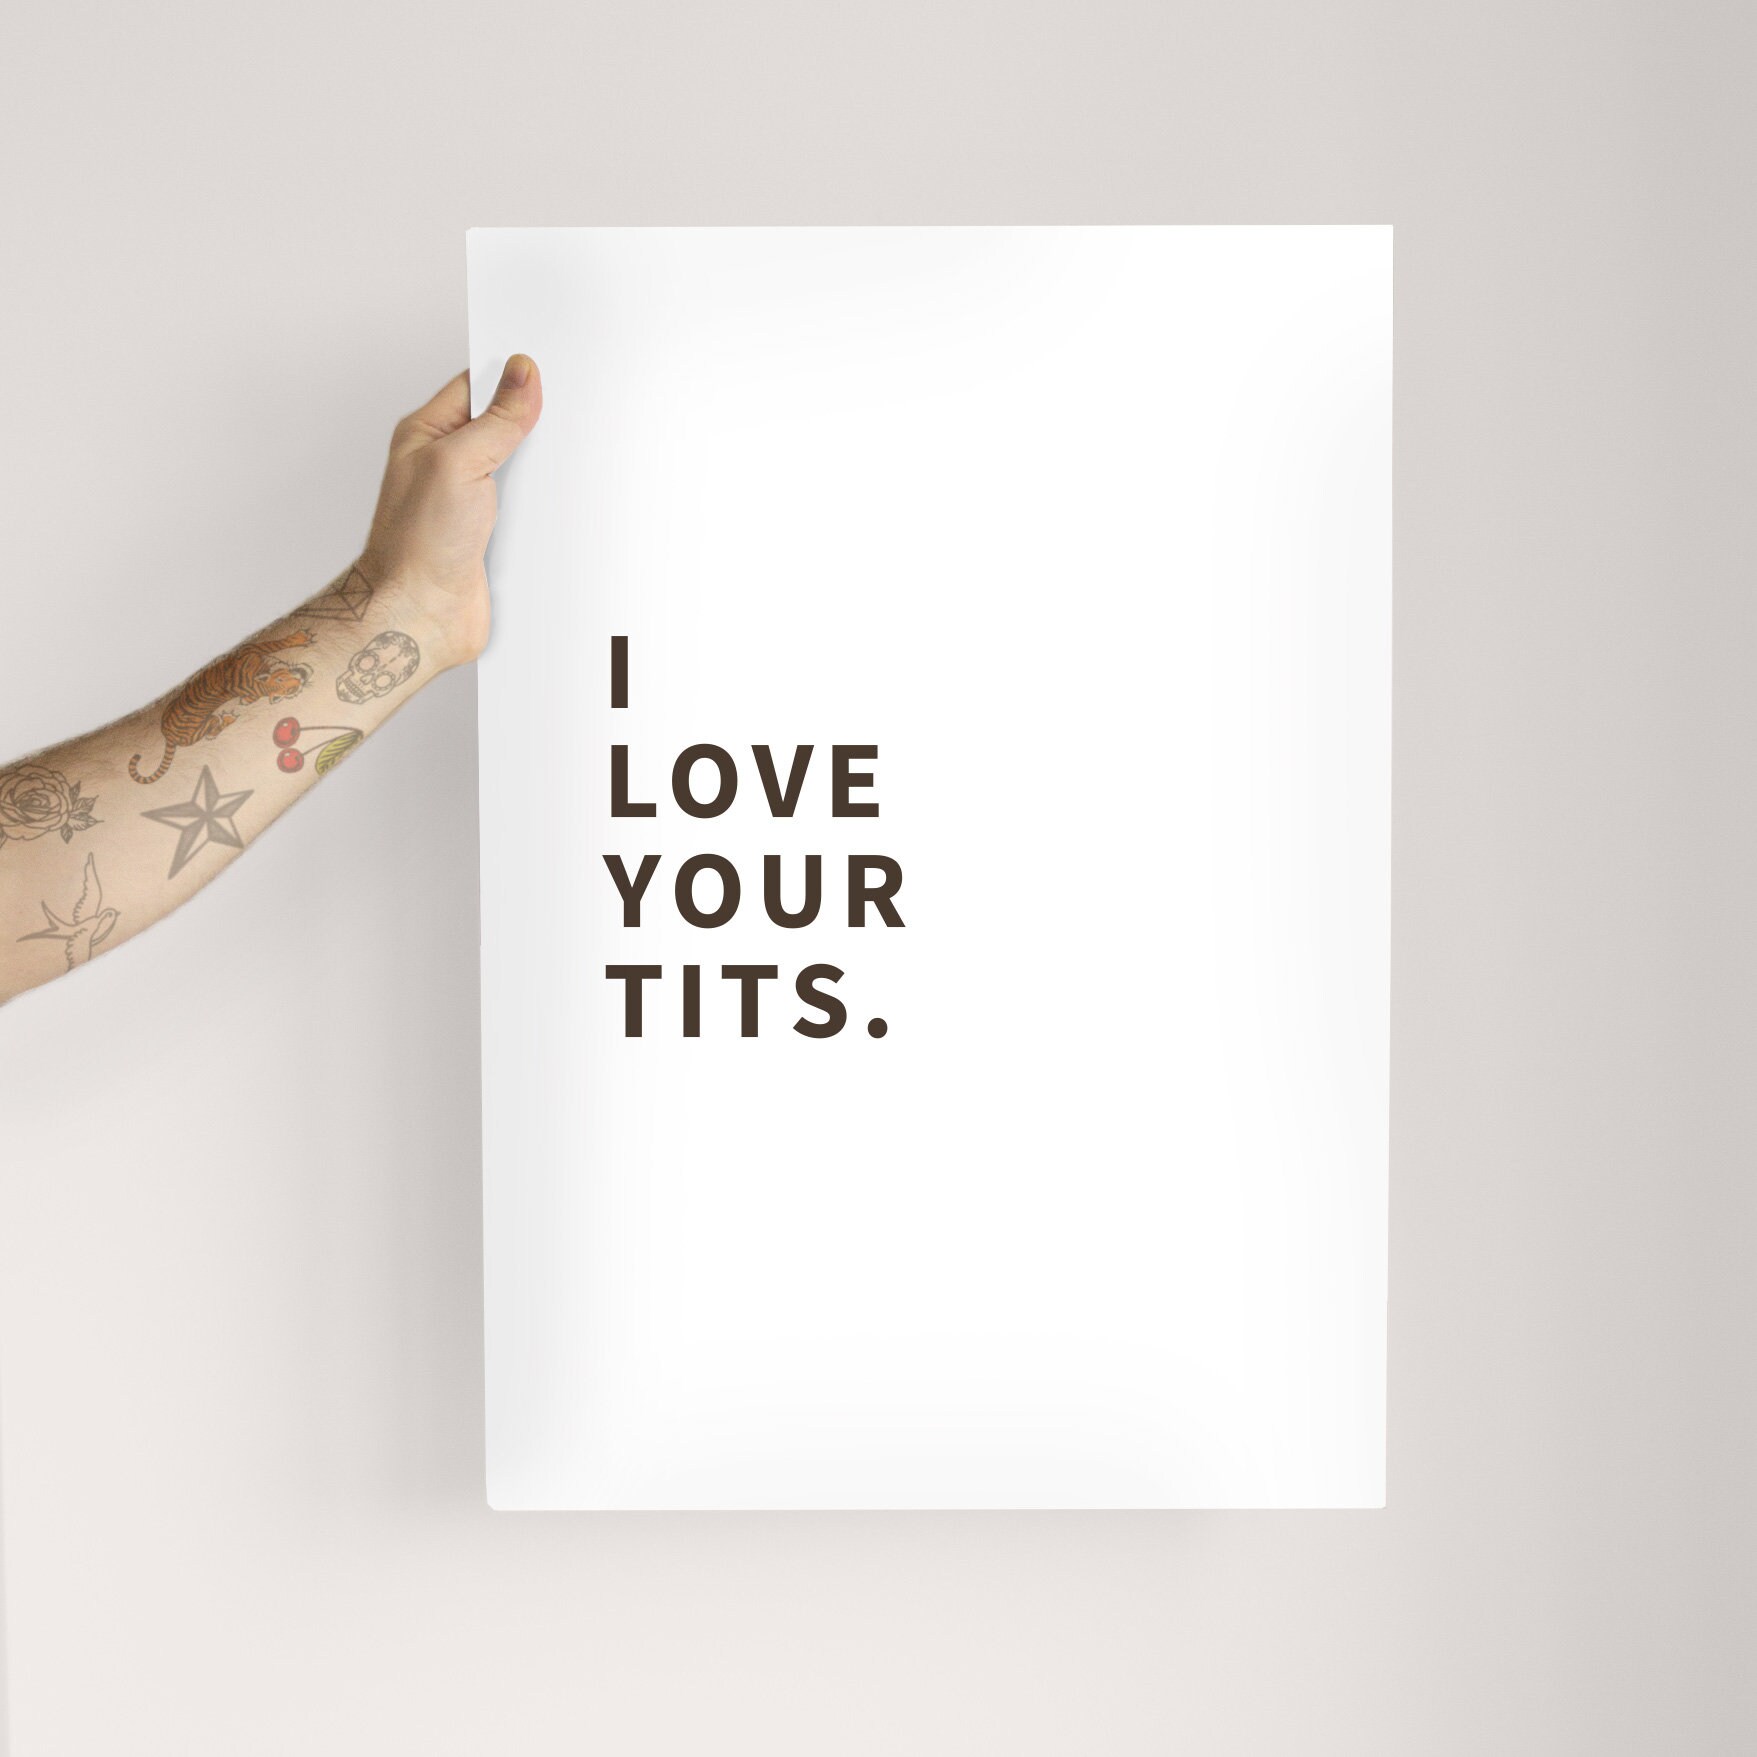 I Love Your Tits Poster in Pink White or Green Porn Photo Hd